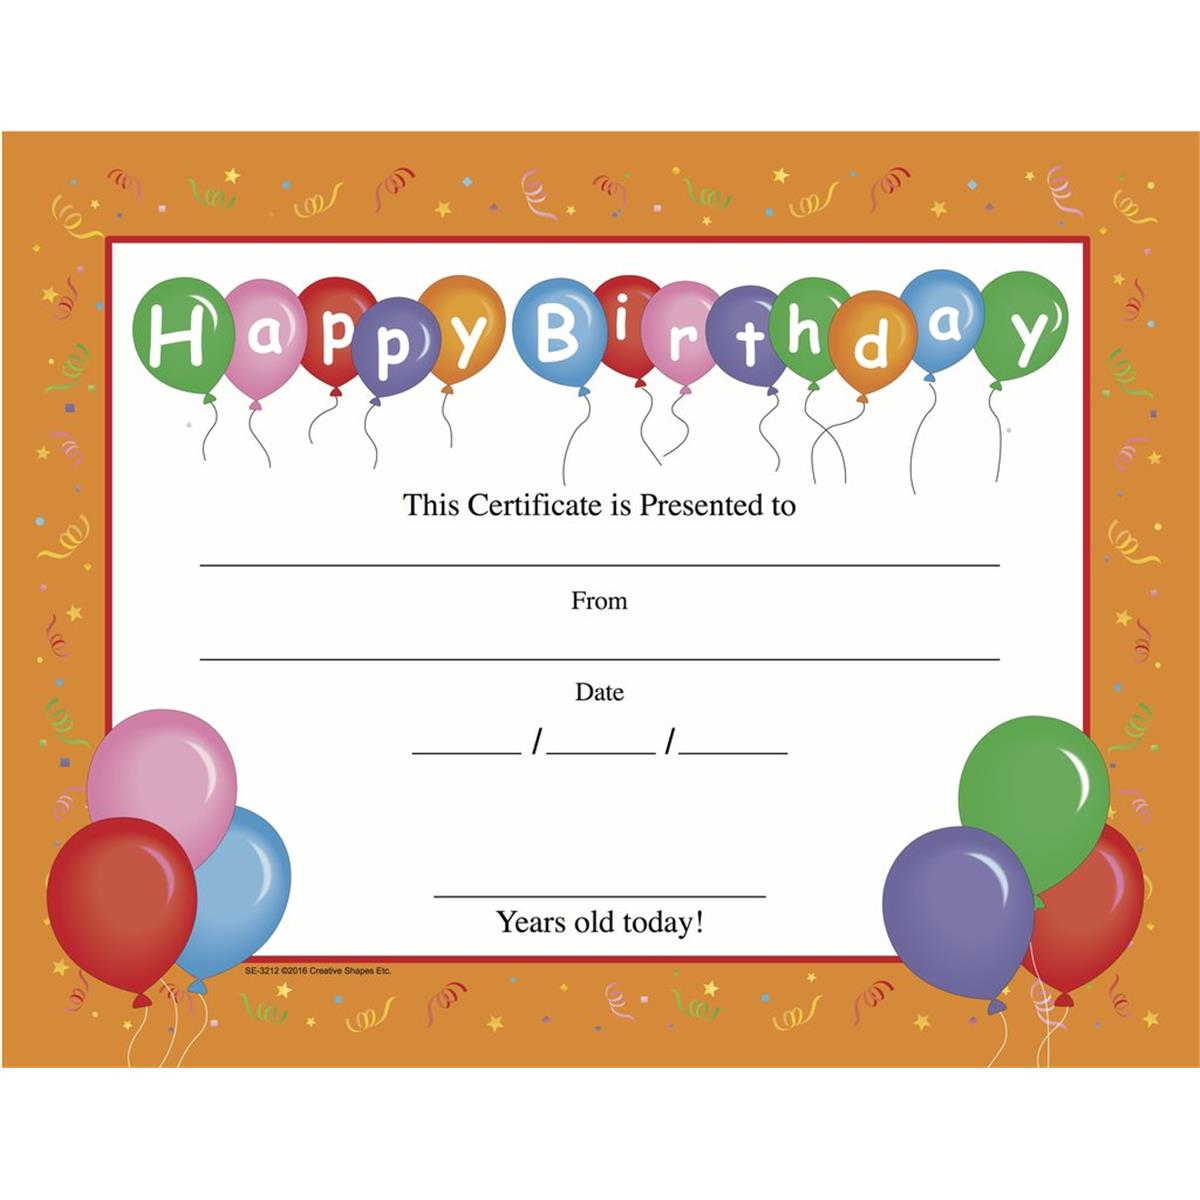 Se-3212 8.5 X 11 In. Birthday Certificate - 30 Sheets Per Pack